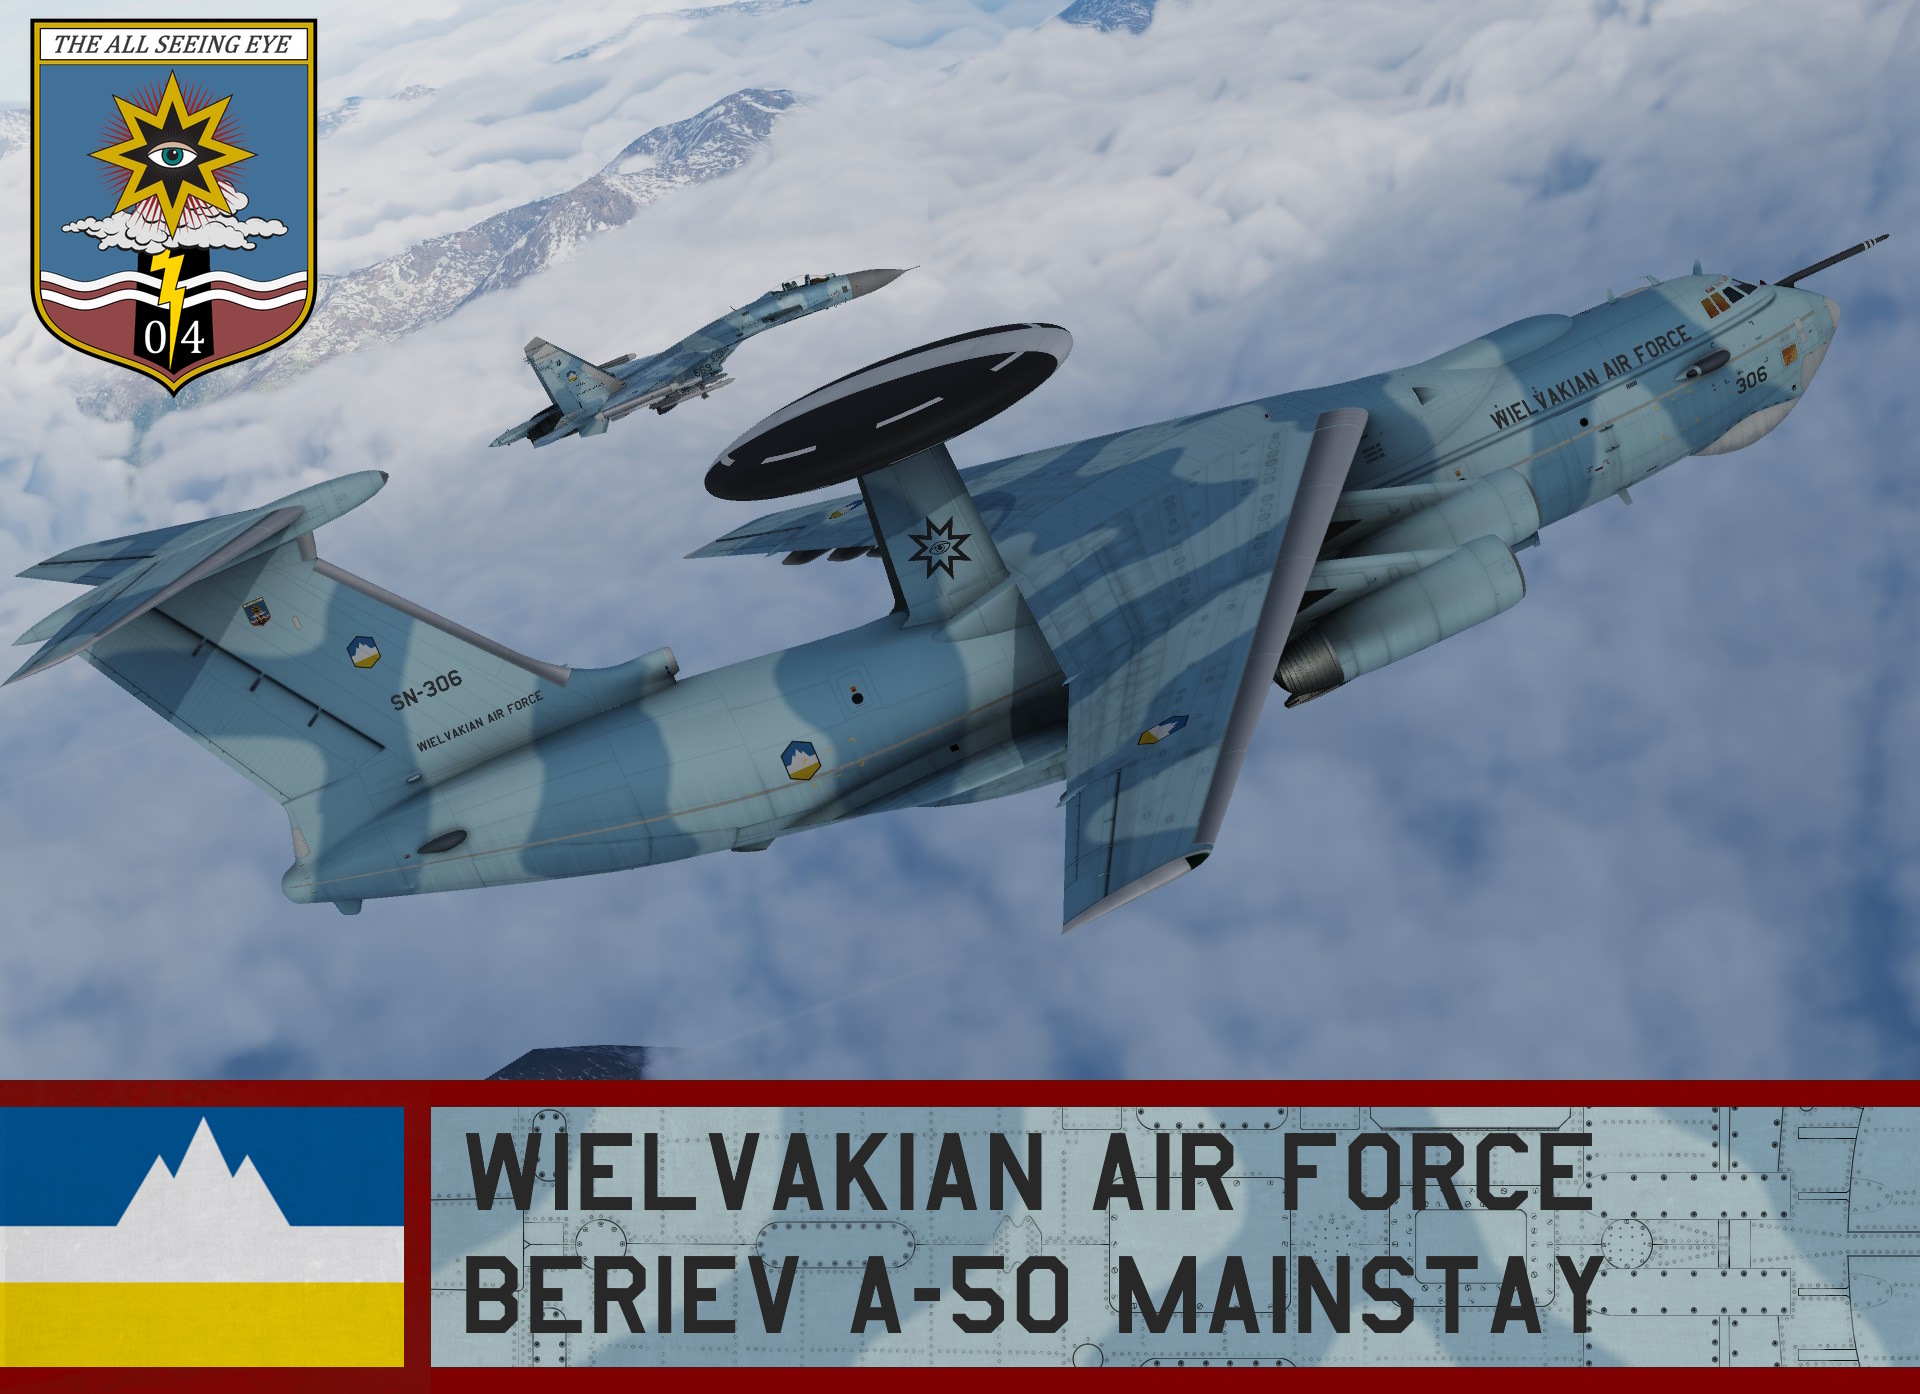 Wielvakian Air Force, A-50 Mainstay - Ace Combat